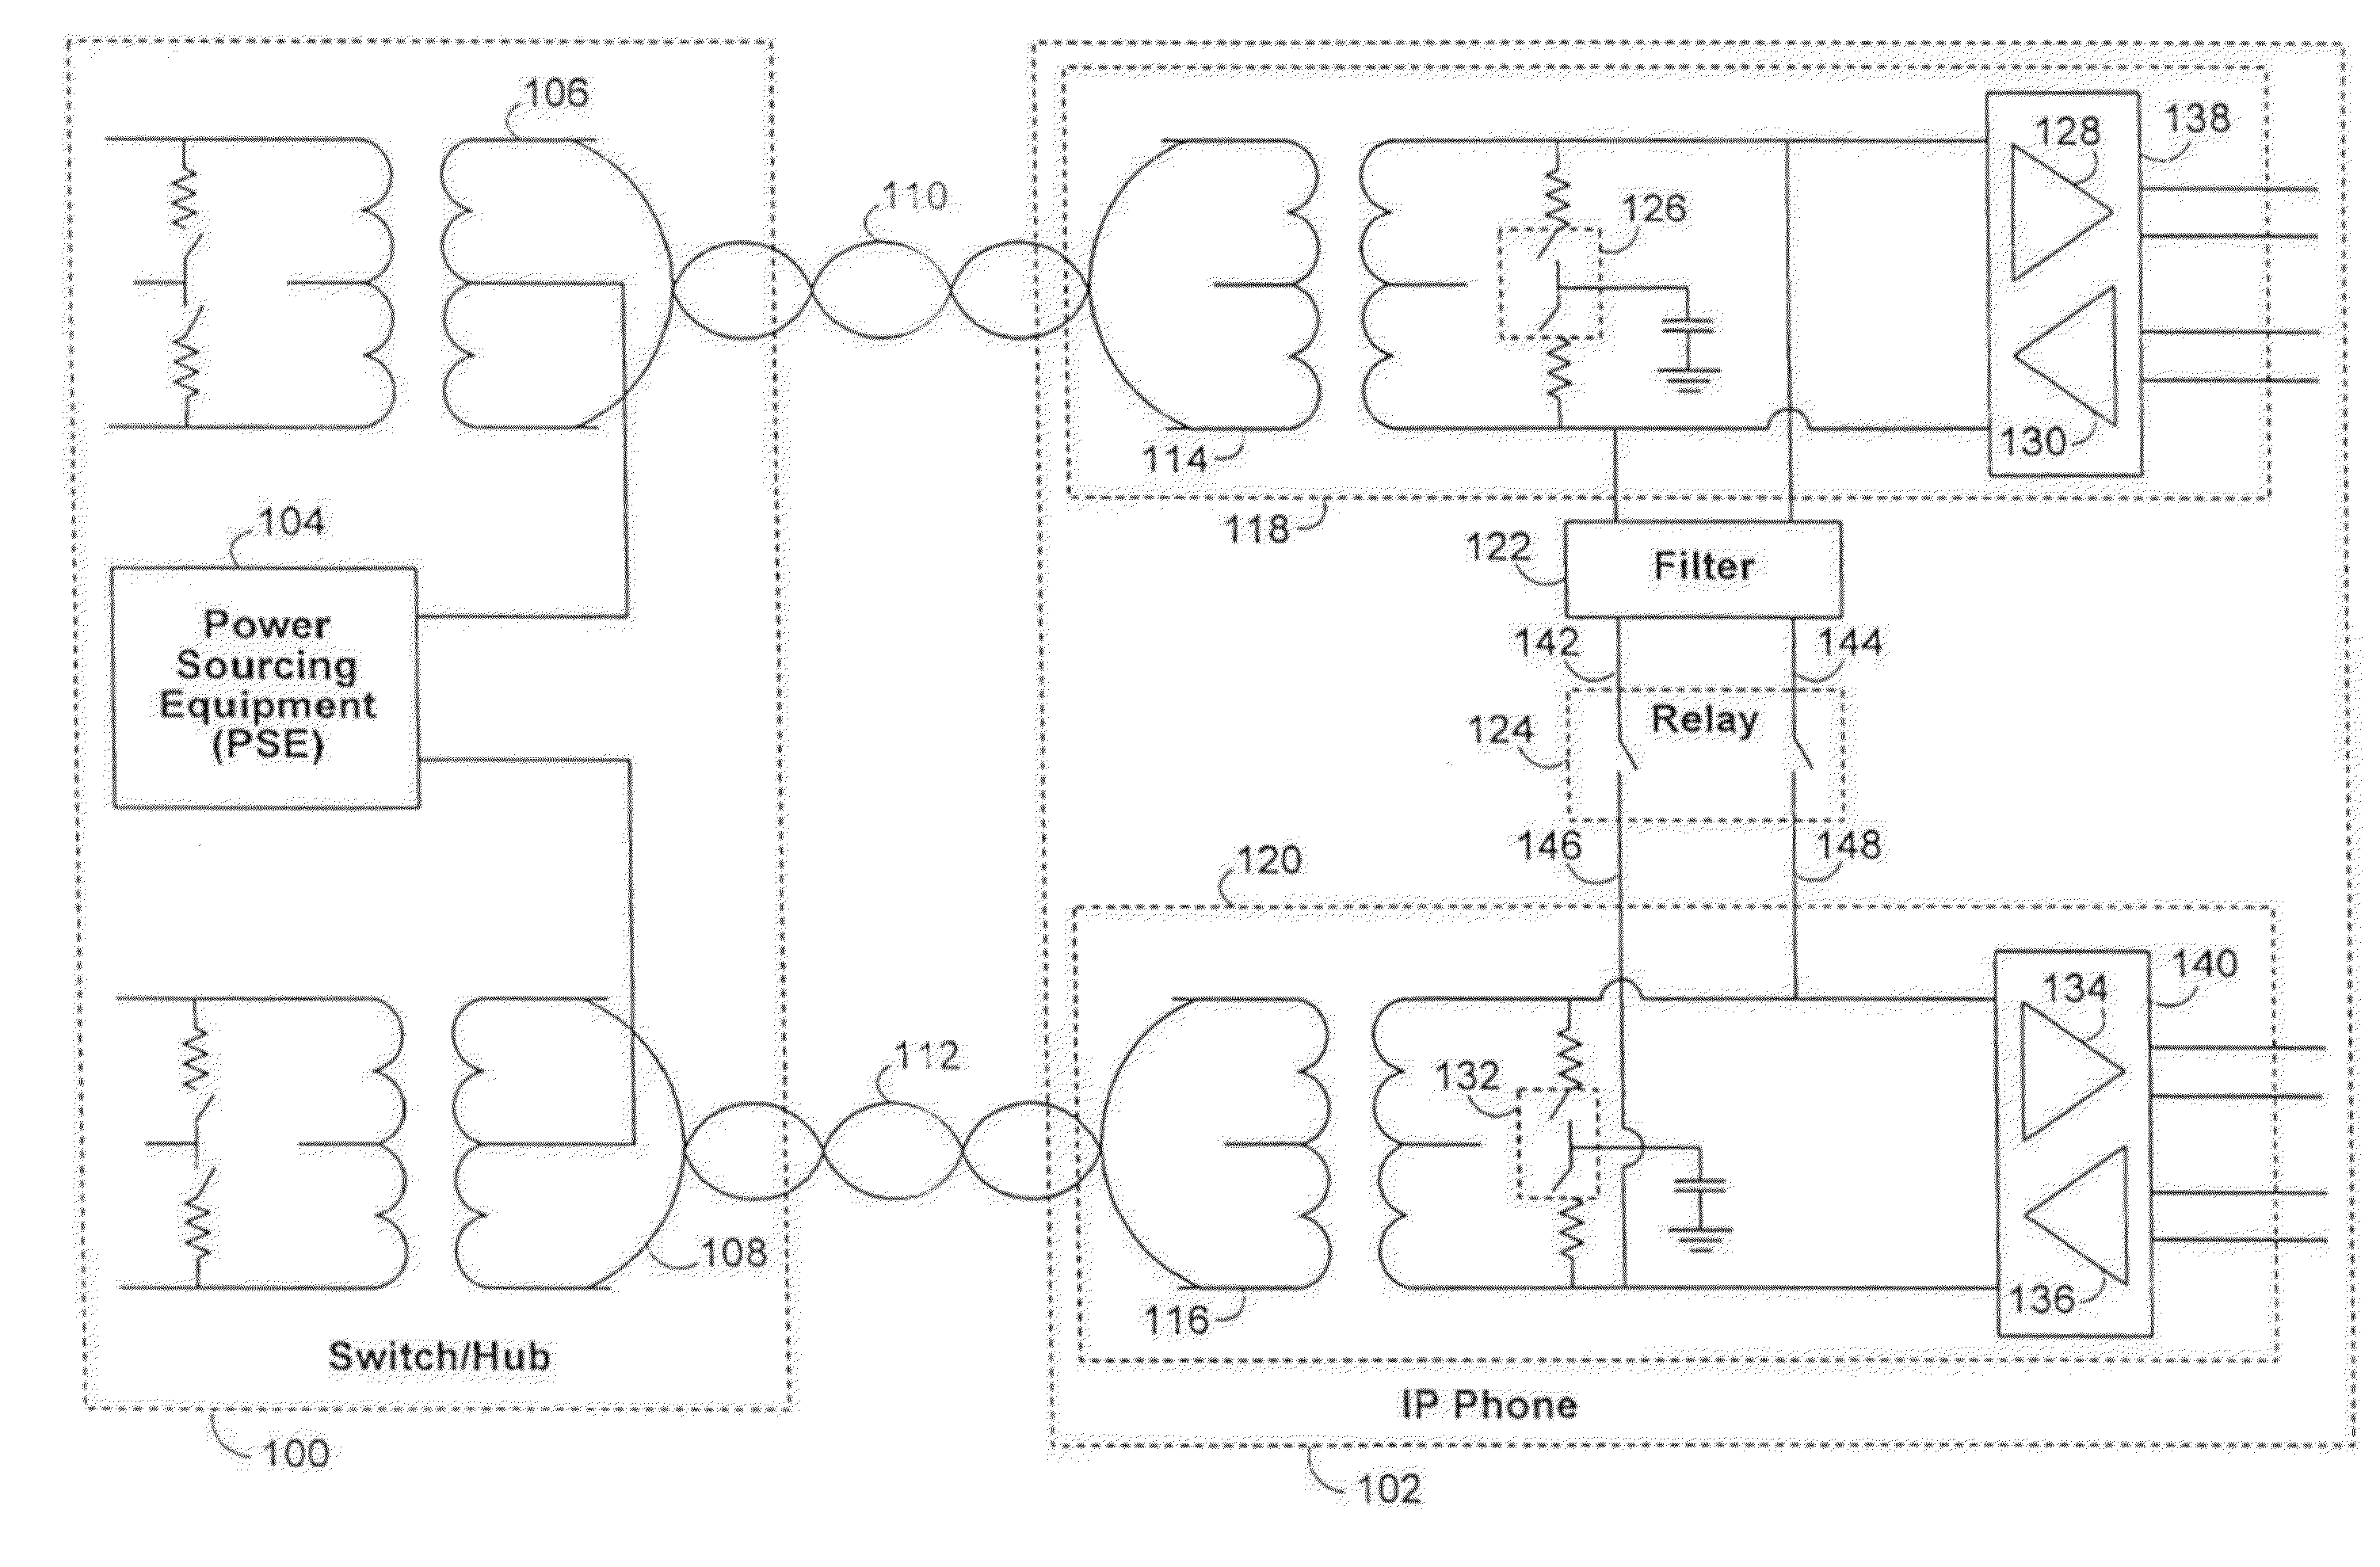 Relay circuitry and switching circuitry for power-over-network devices